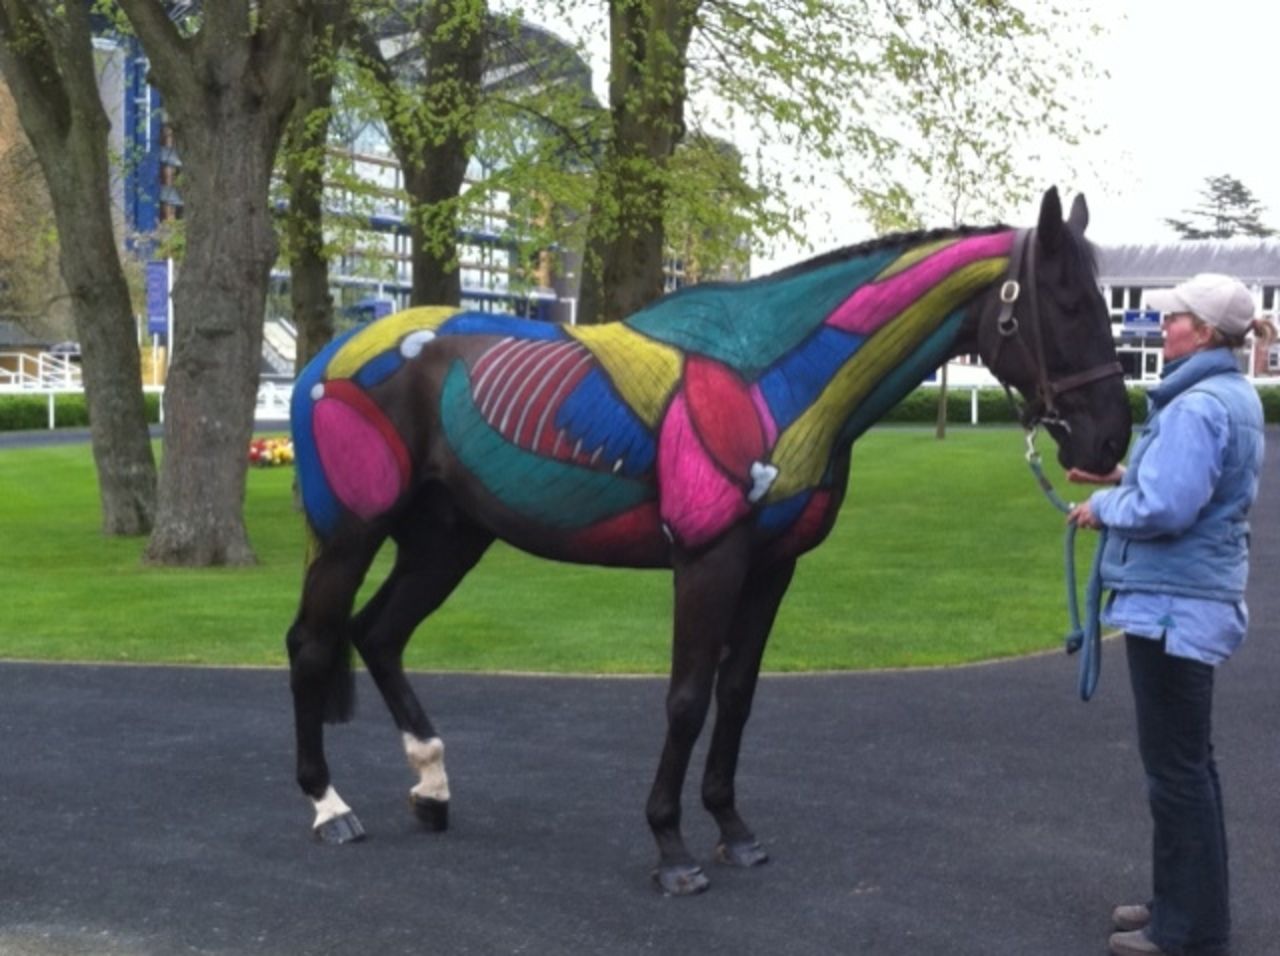 It usually takes around four hours to paint each thoroughbred, such as this one which Rossa displayed at Royal Ascot race course. 